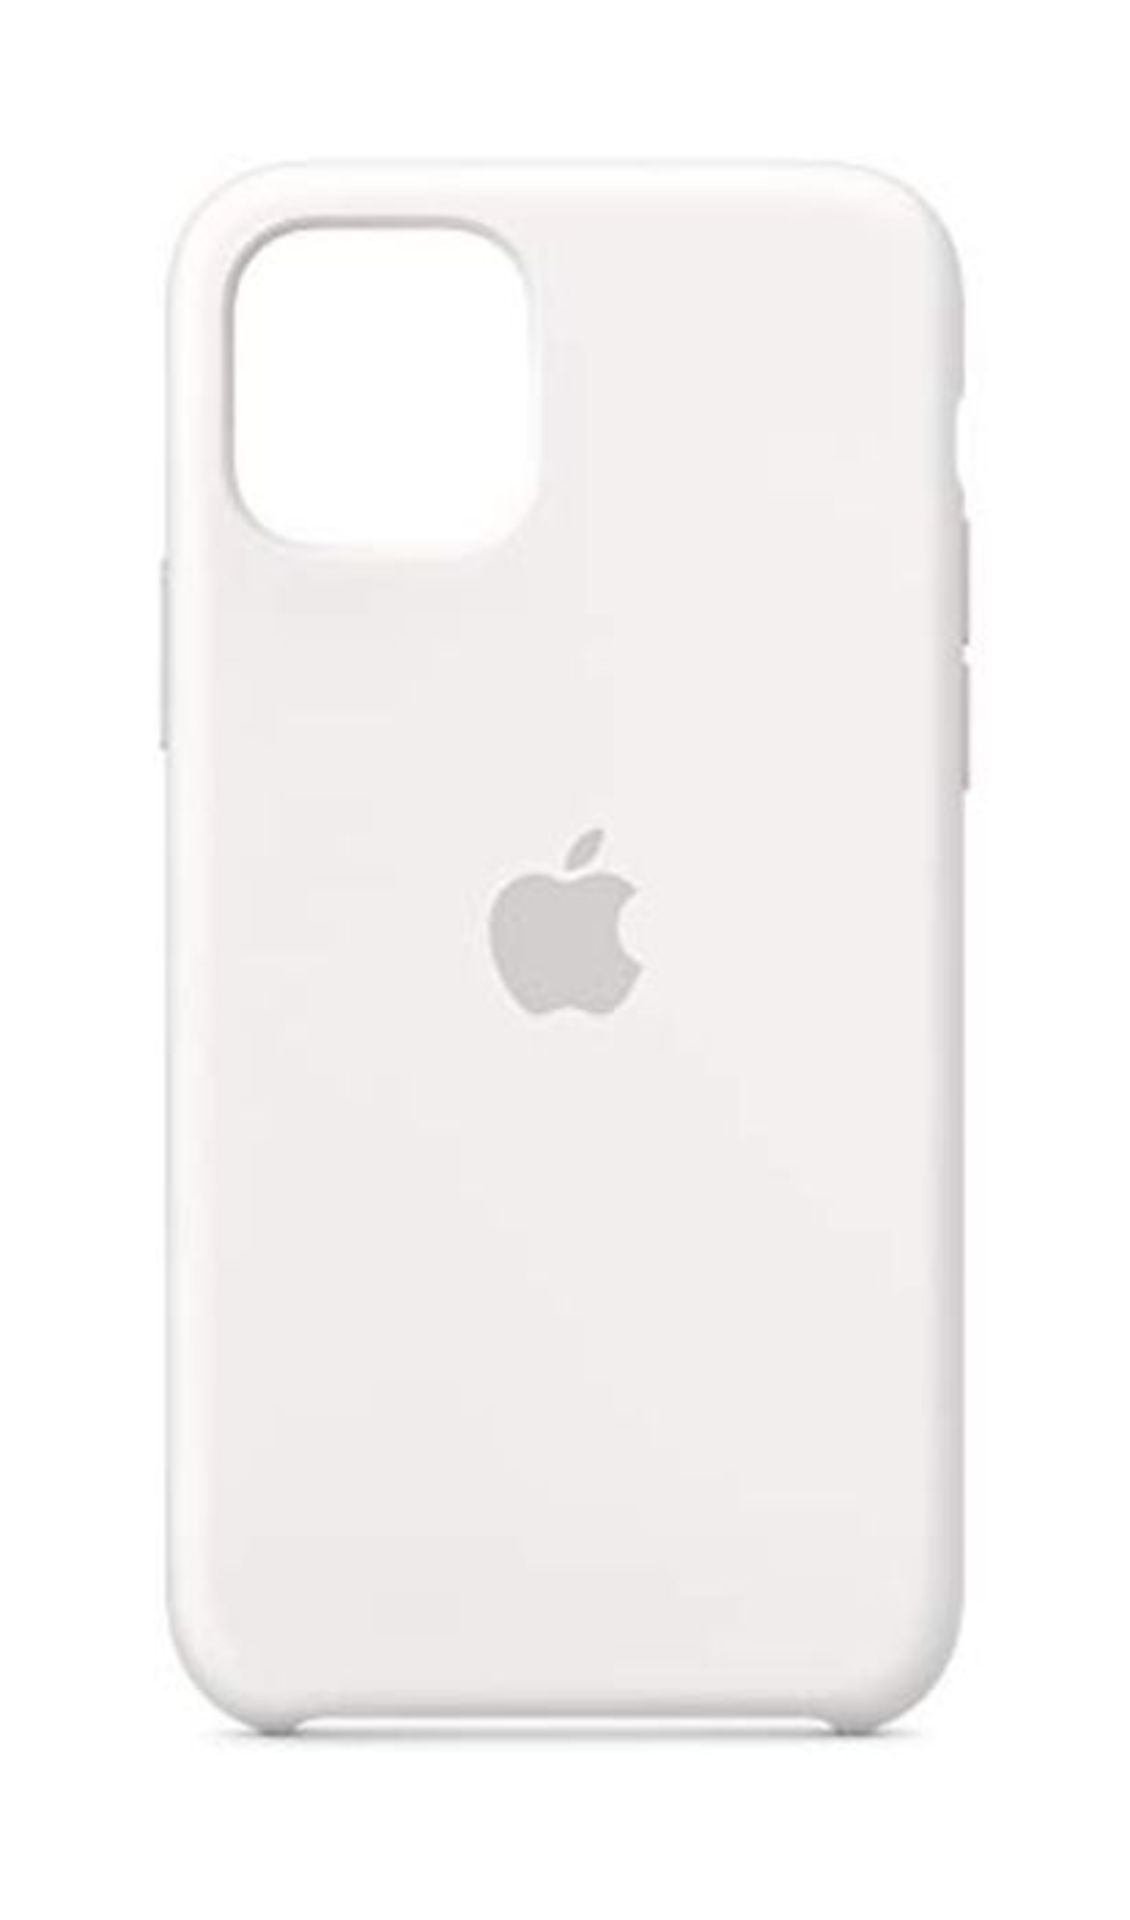 Apple Silicone Case (for iPhone 11 Pro) - White